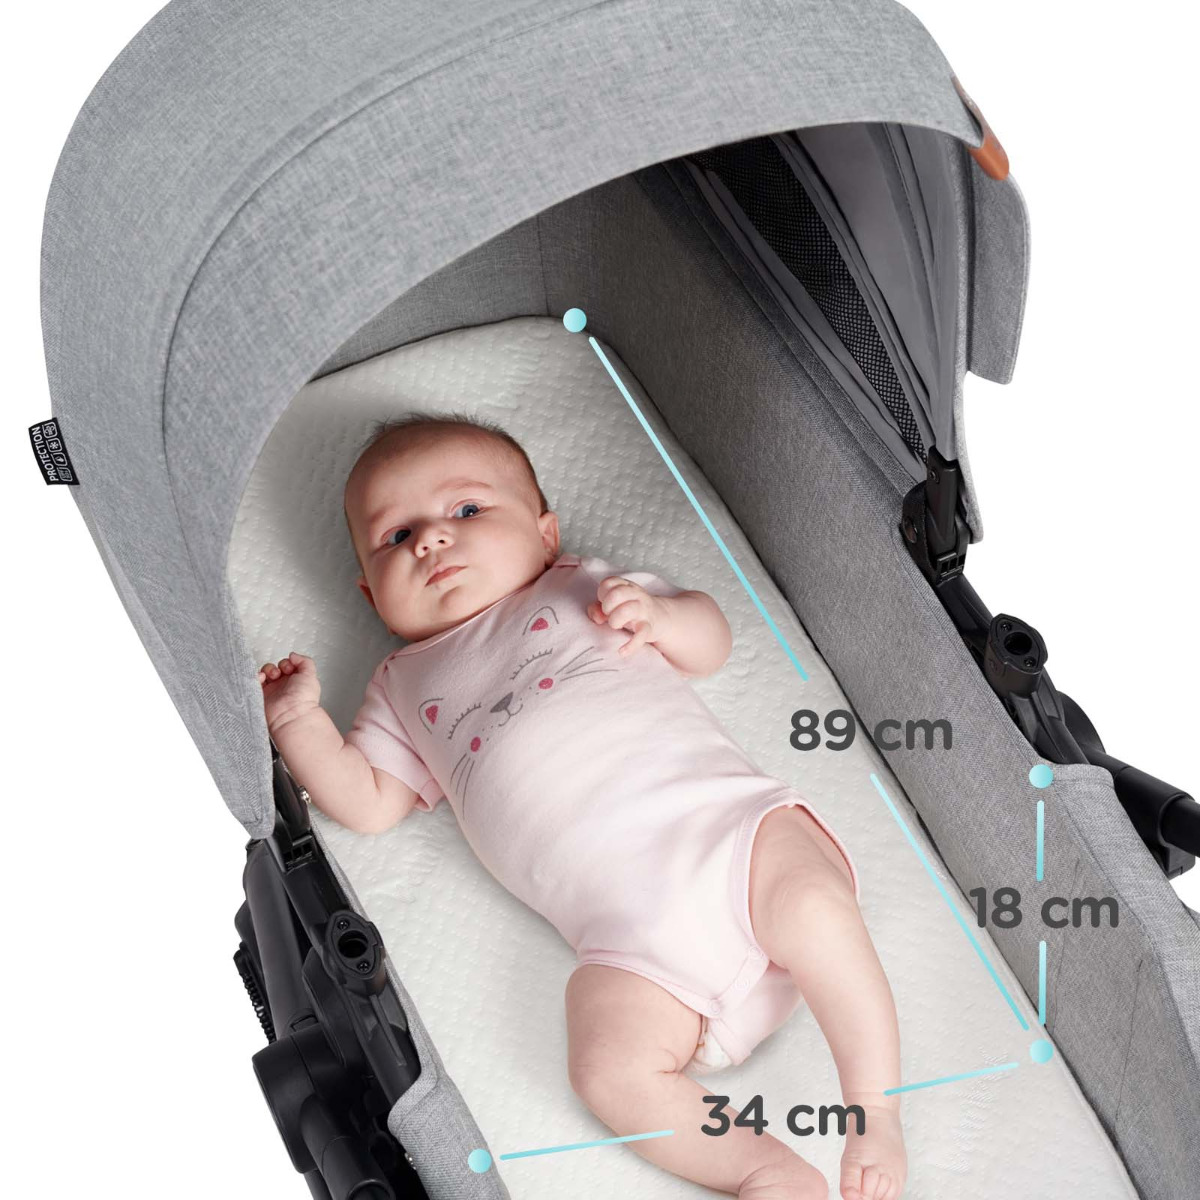 3in1 Travel System B-TOUR